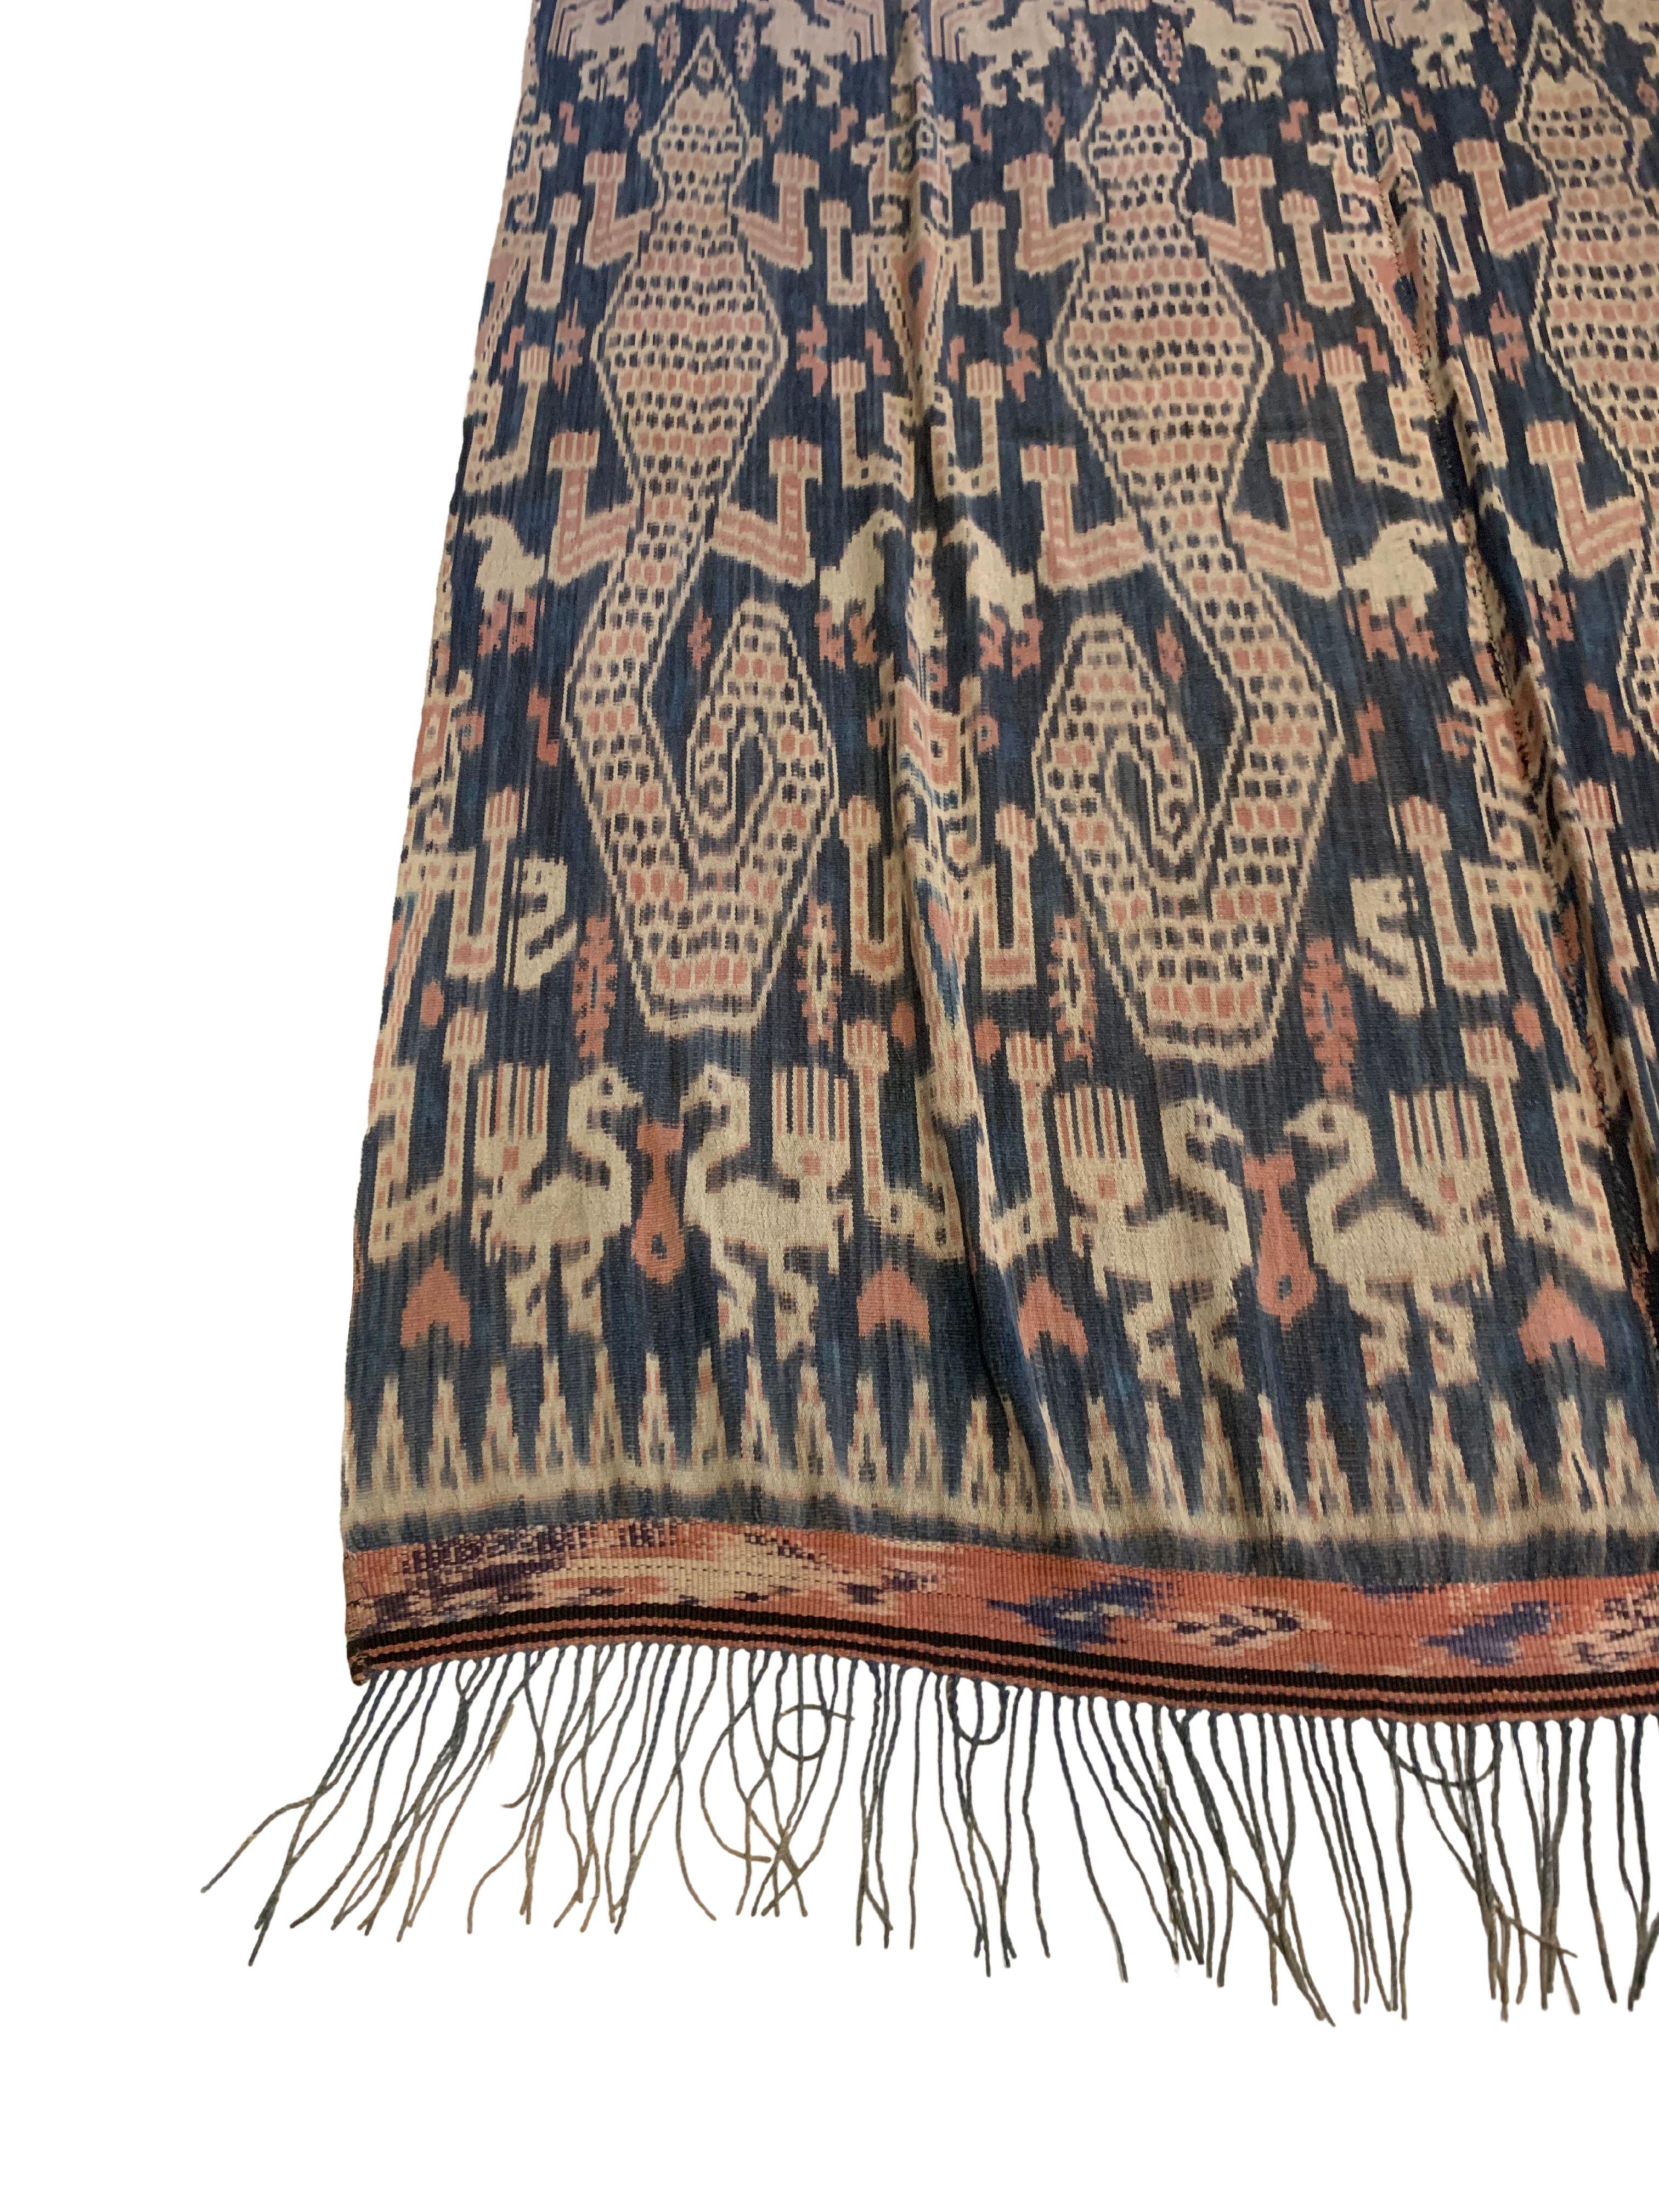 Hand-Woven Ikat Textile from Sumba Island Tribal Motifs, Indonesia For Sale